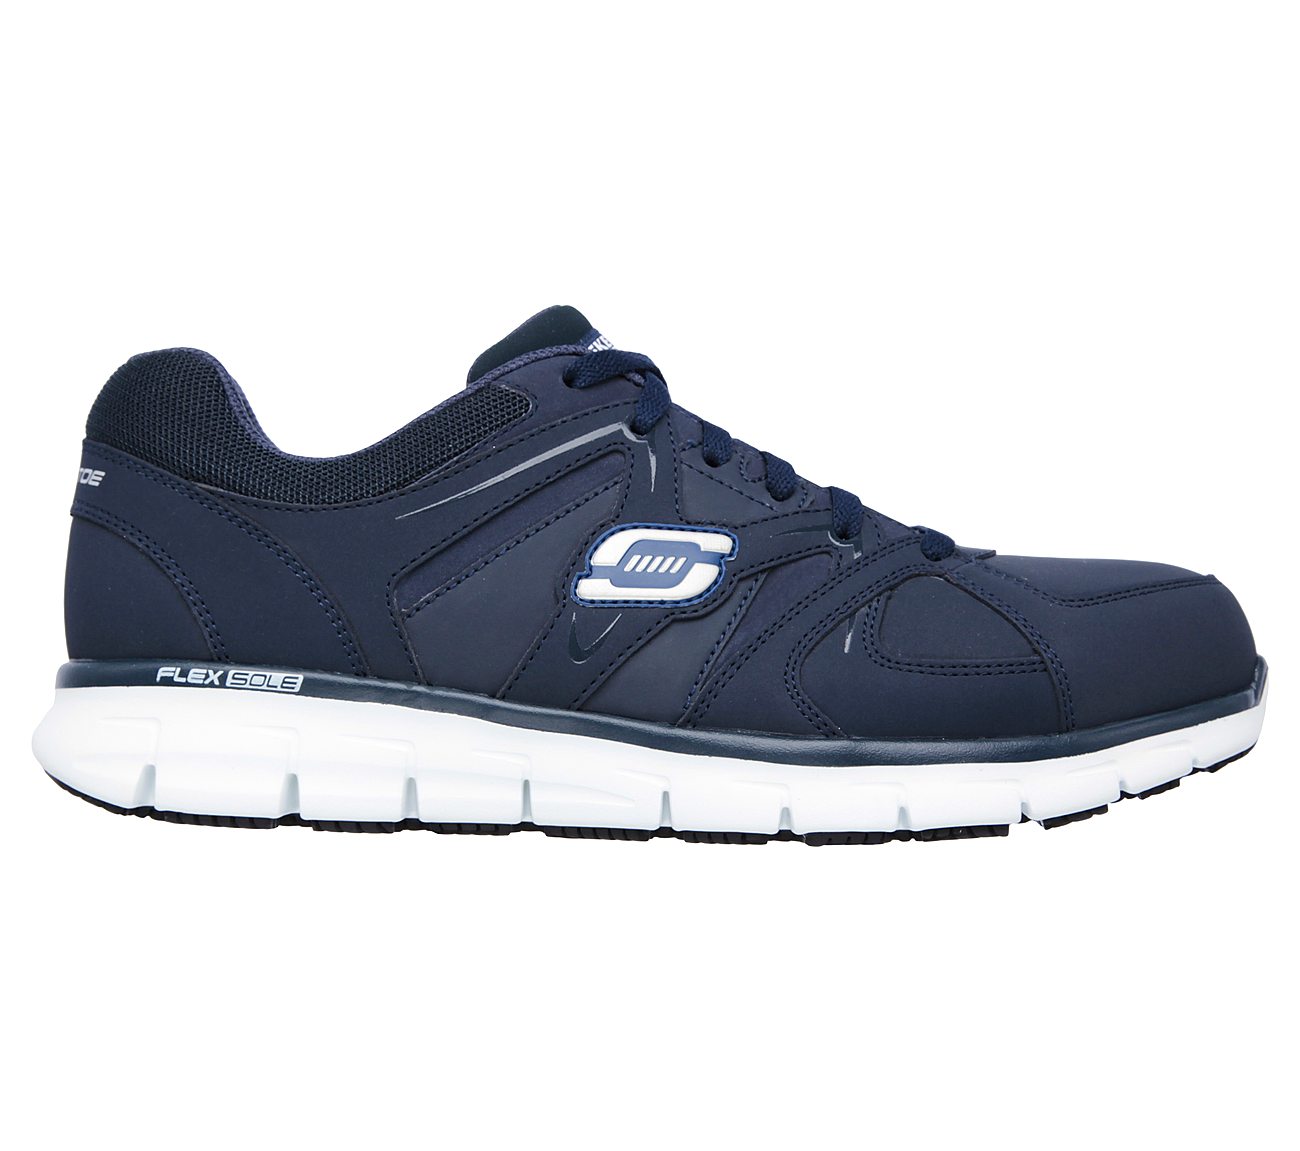 are skechers good for work